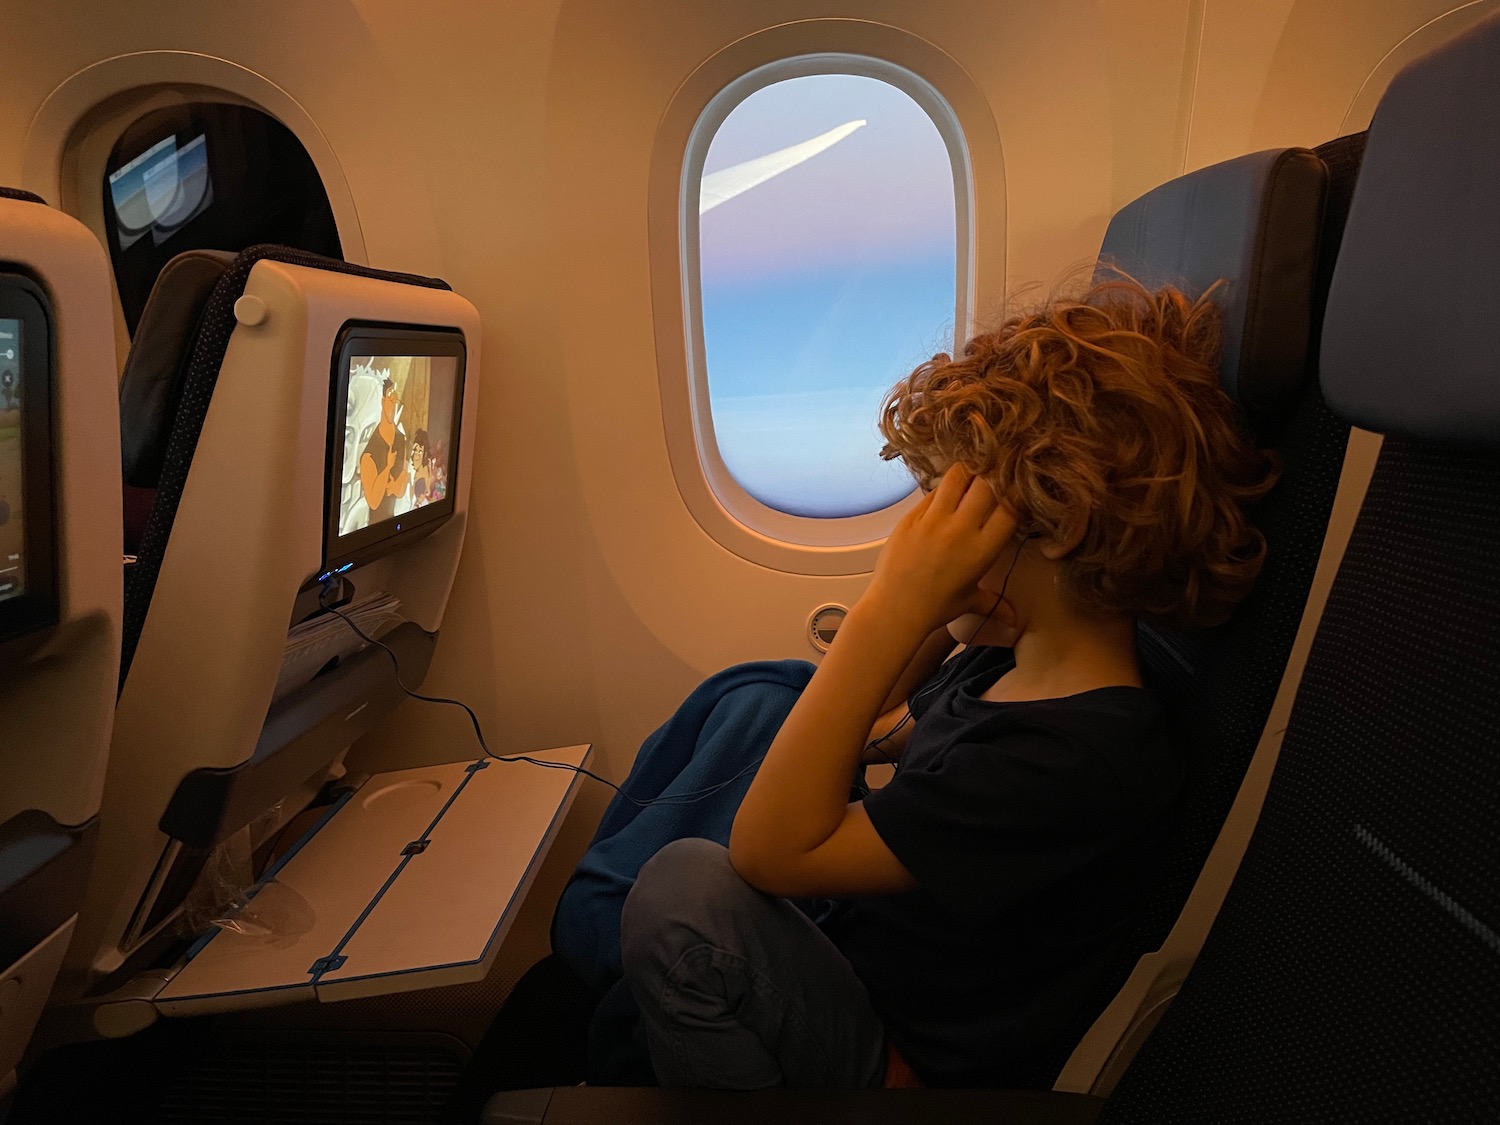 a boy sitting in an airplane with a screen on